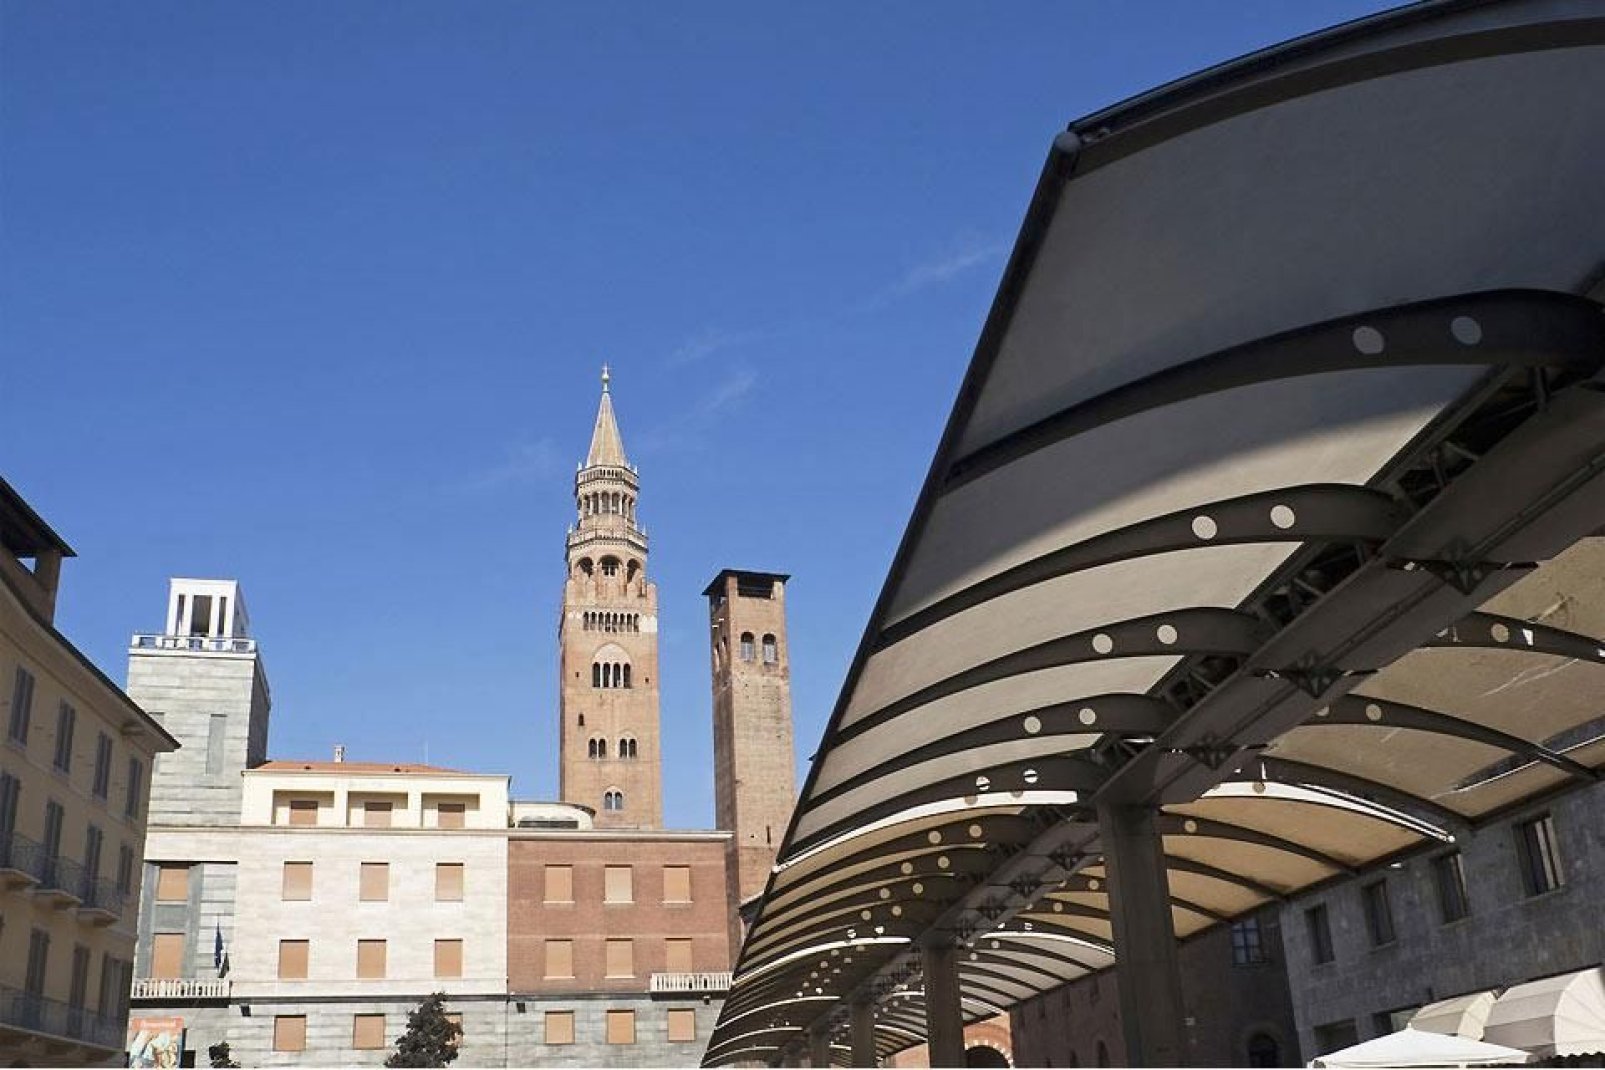 Cremona is located at the heart of the Po valley on the banks of the river of the same name; it was founded as far back as the Roman era